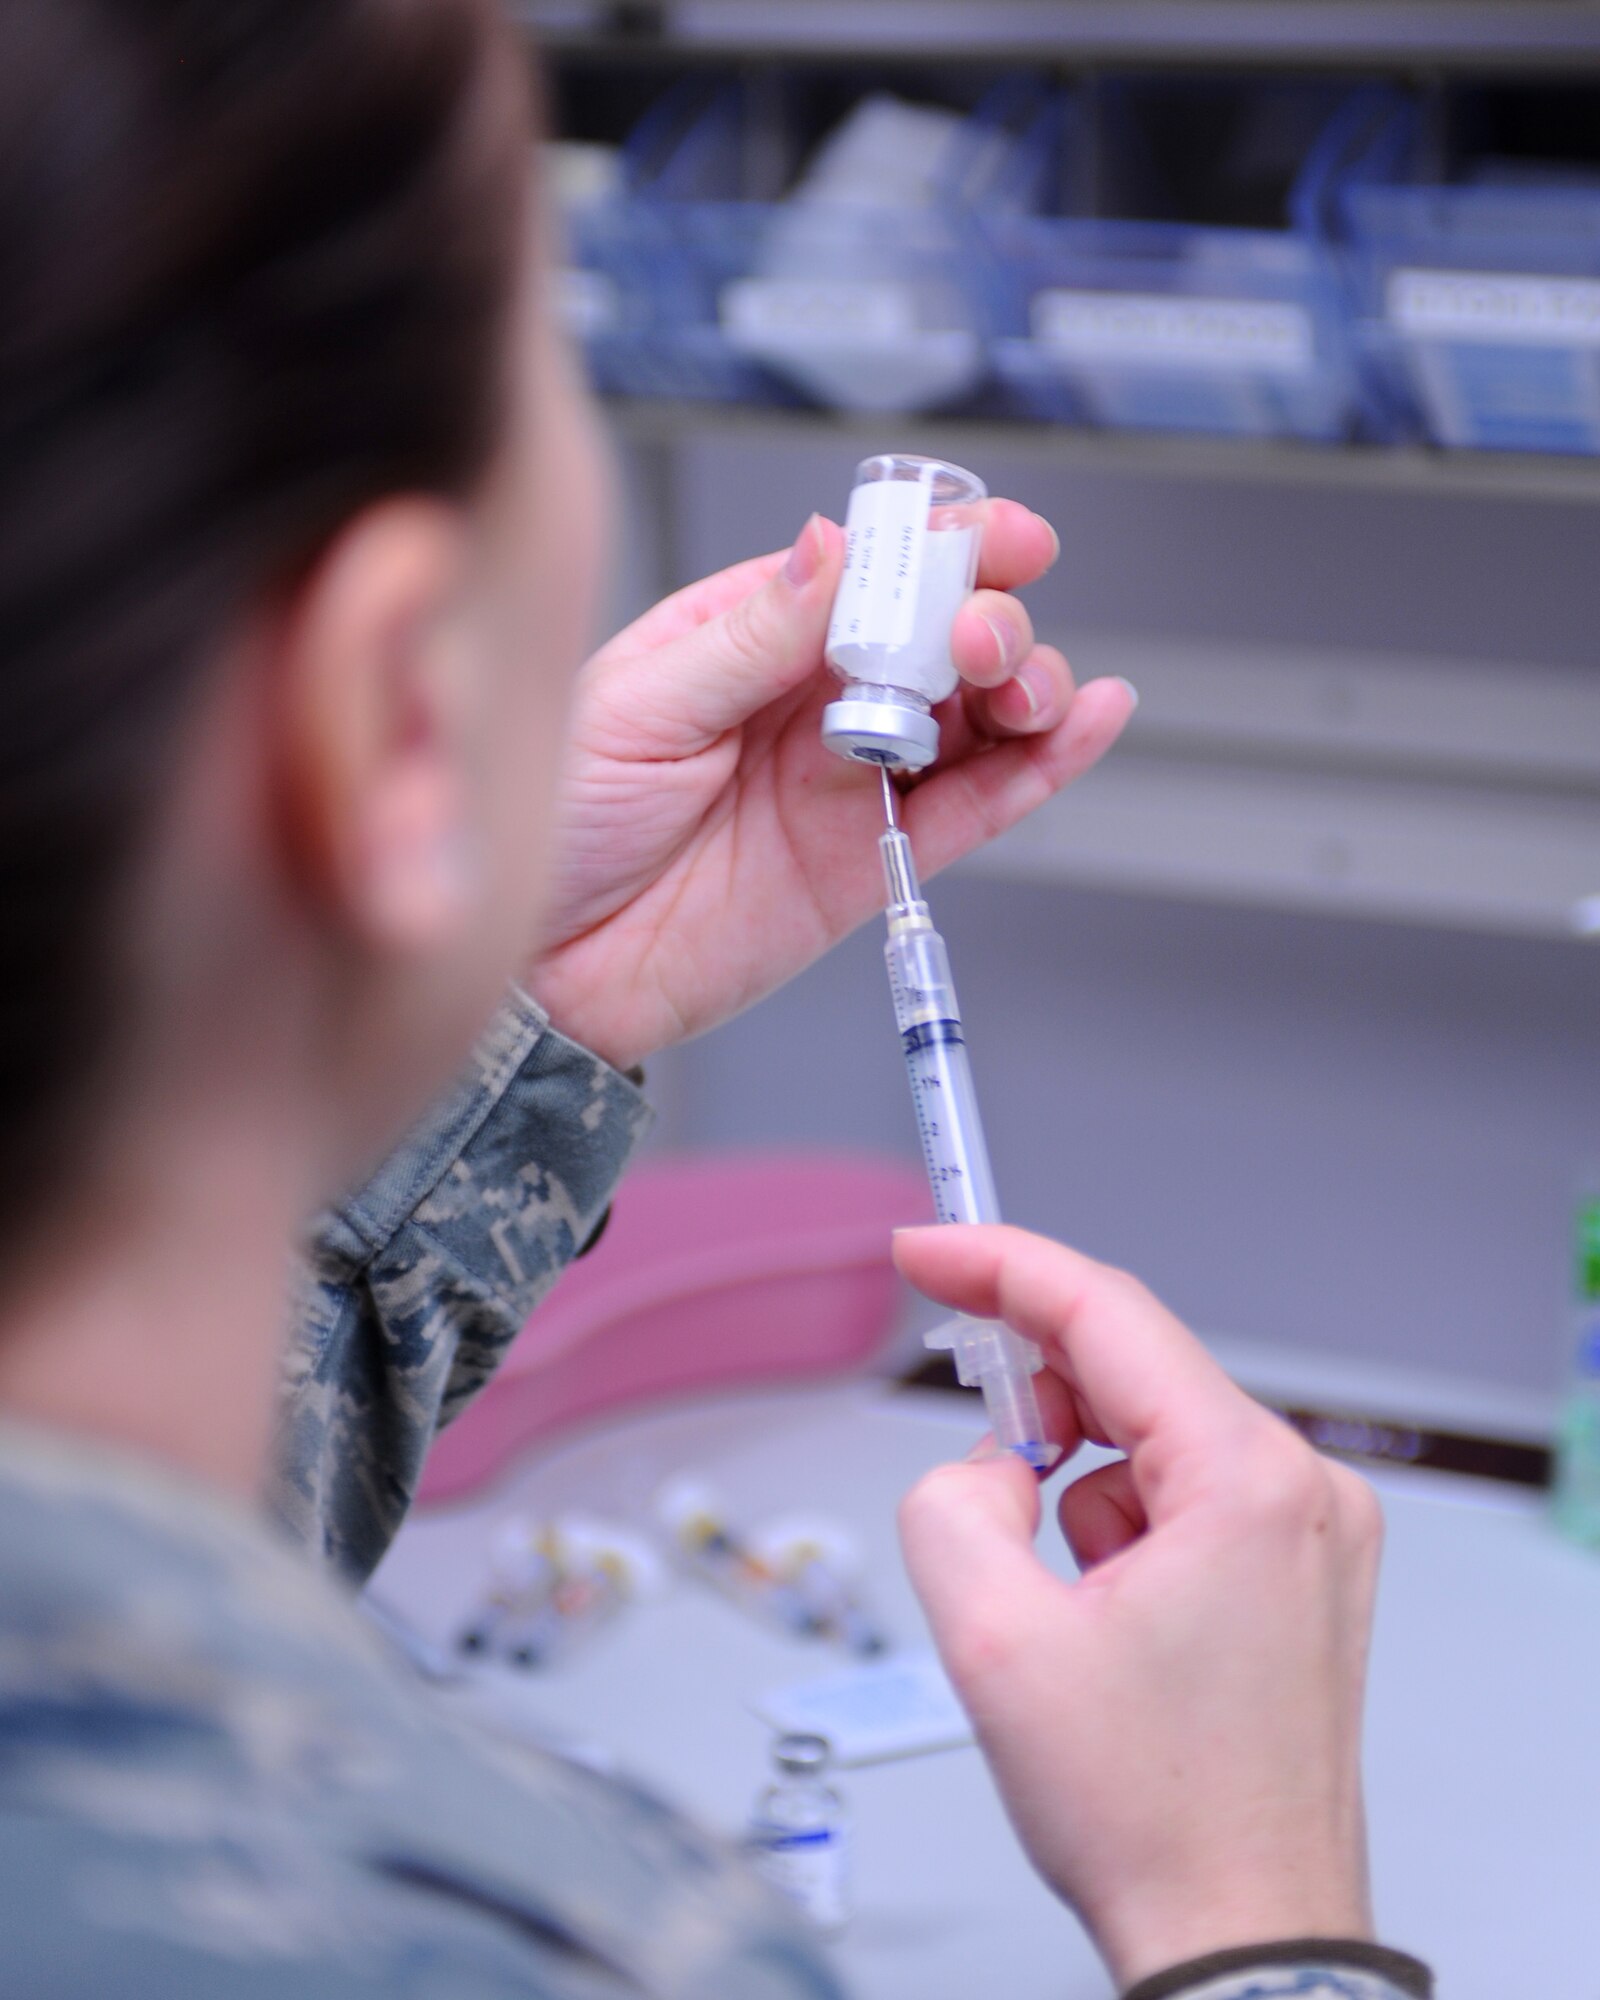 Senior Airman Megan Knutson, 28th Medical Operations Squadron medical technician, fills a syringe with a vaccination here, May 13. The immunizations clinic provides vaccinations for more than 1,500 beneficiaries in the Black Hills area. (U.S. Air Force photo/Senior Airman Kasey Zickmund)